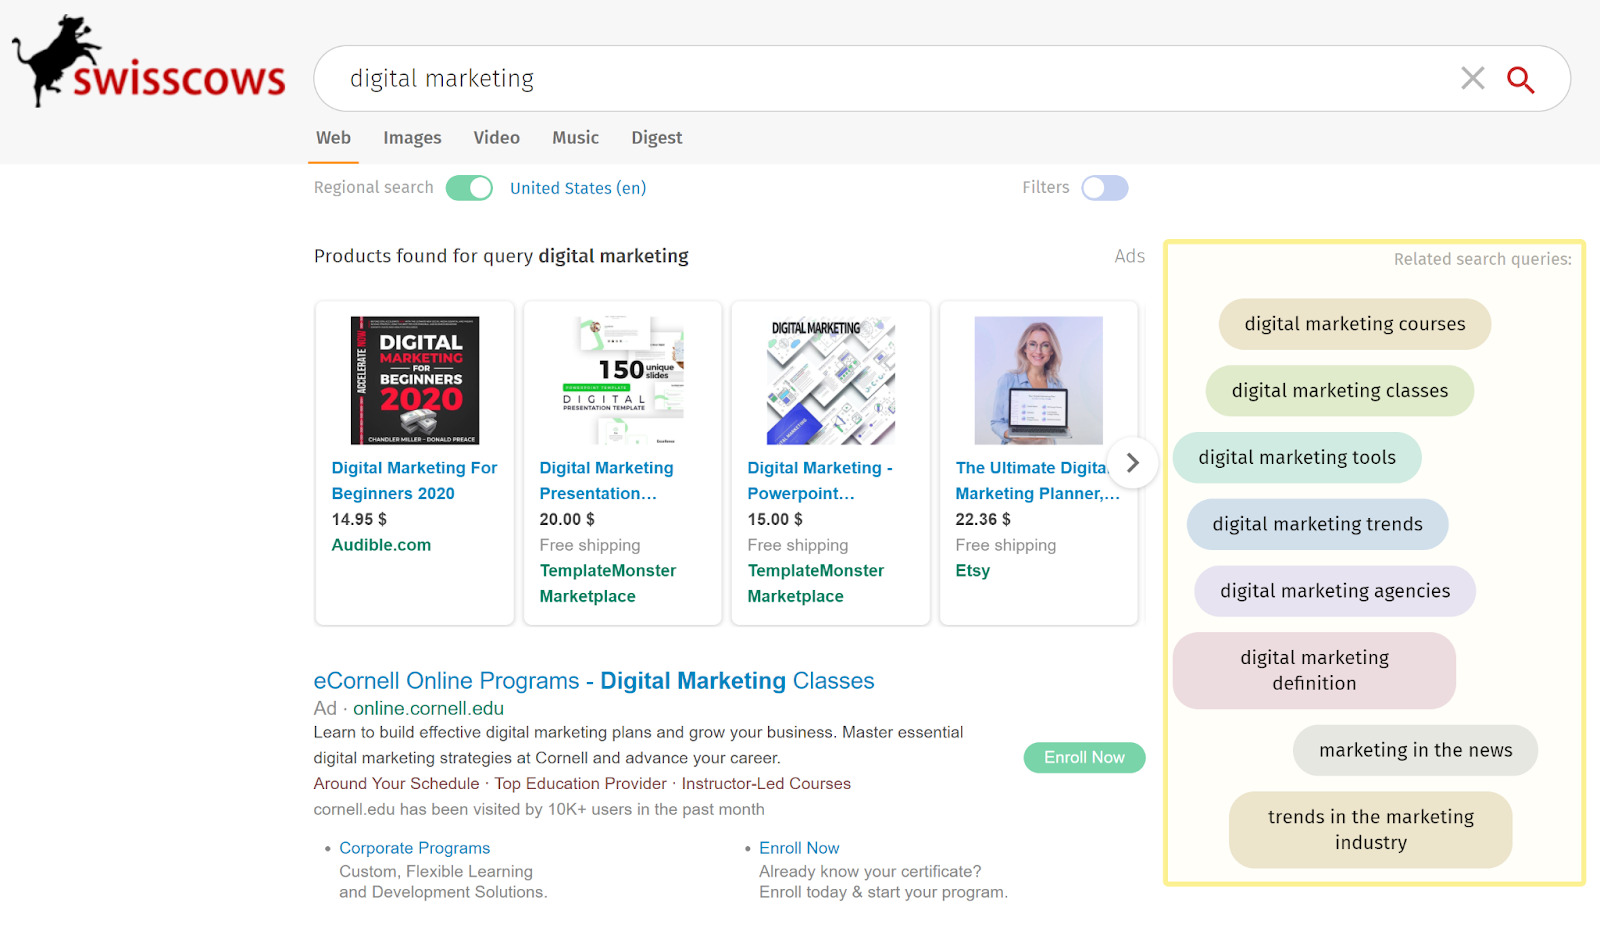 Search results for "digital marketing." Semantic map on the right